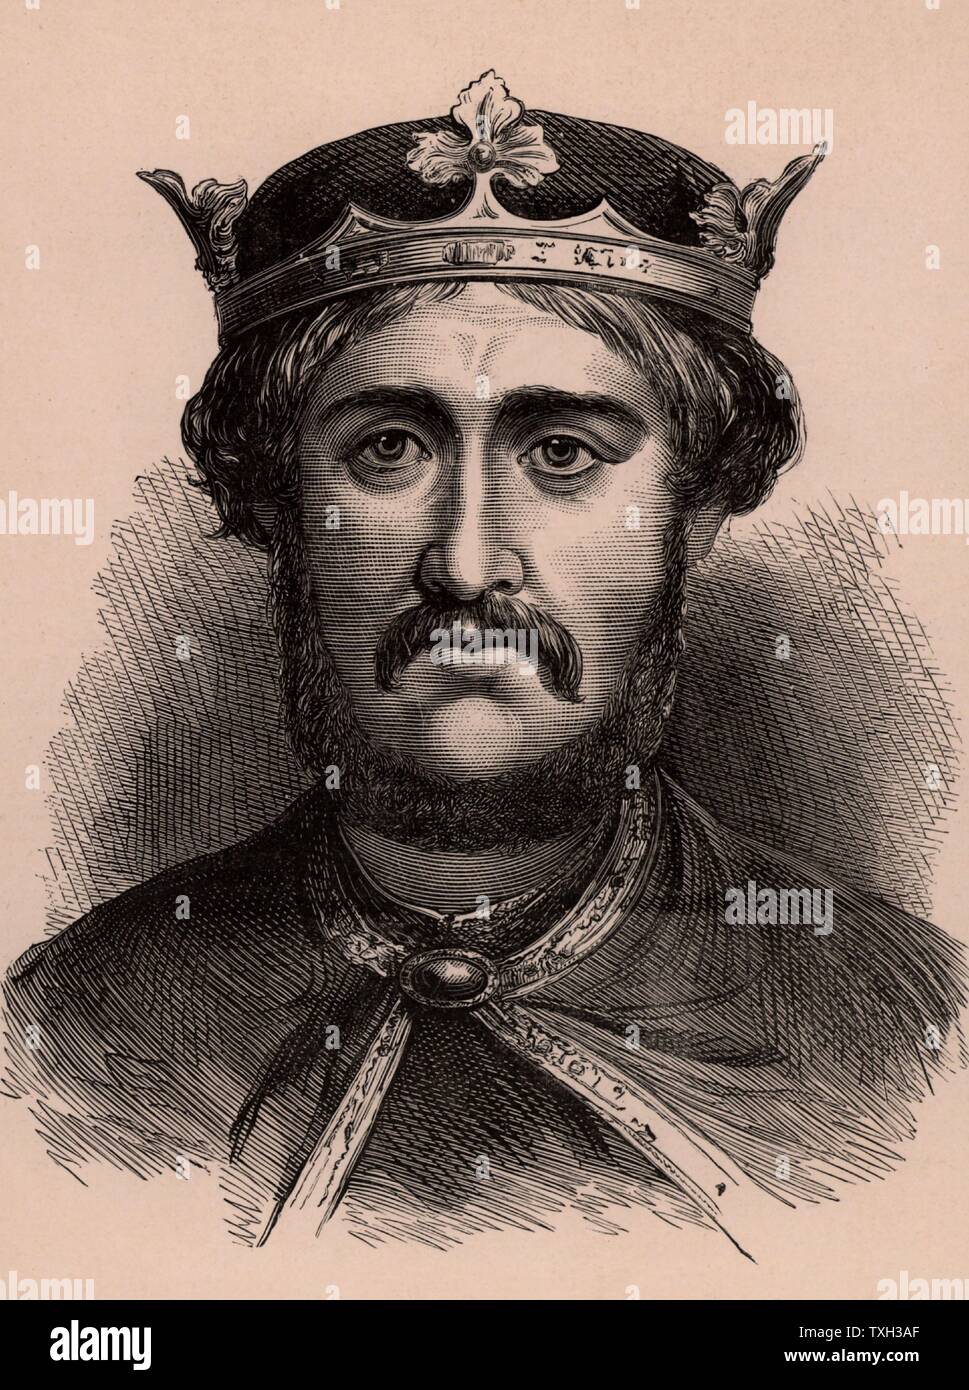 Richard I, Coeur de Lion (1157-99) king of England from 1189. He was the son of Henry II and Eleanor of Aquitaine and was member of the Angevin dynasty.   c.1900 Wood engraving Stock Photo